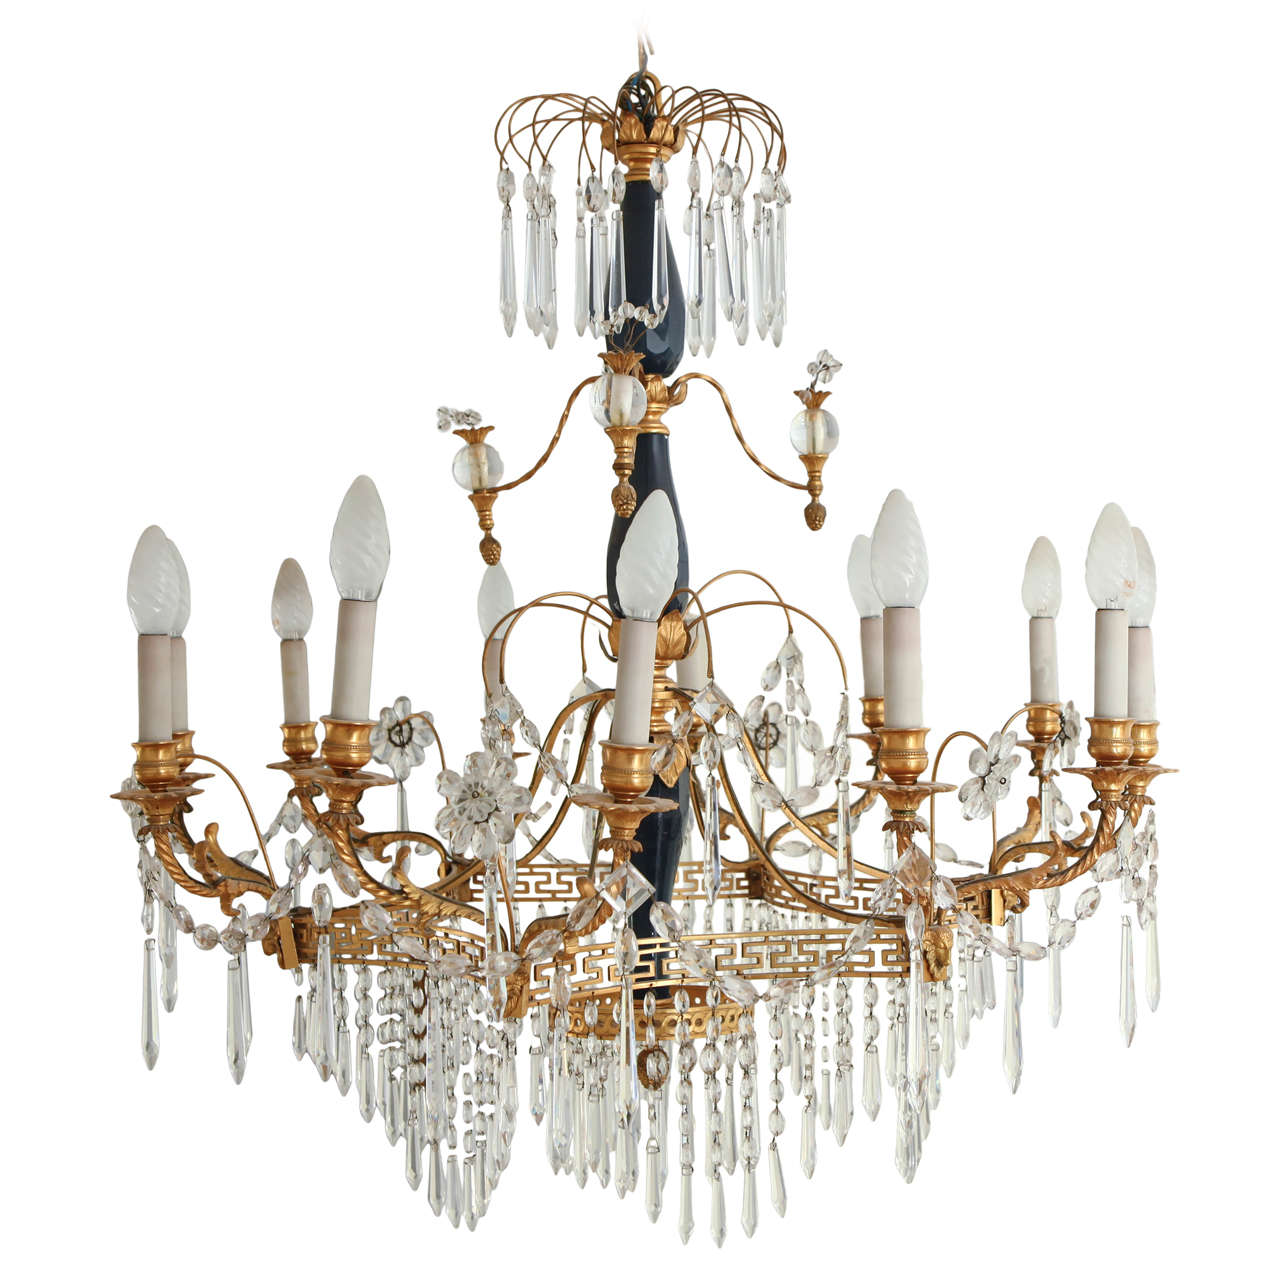 19th Century Neoclassical Crystal and Gilt Bronze, Twelve-Light Chandelier For Sale